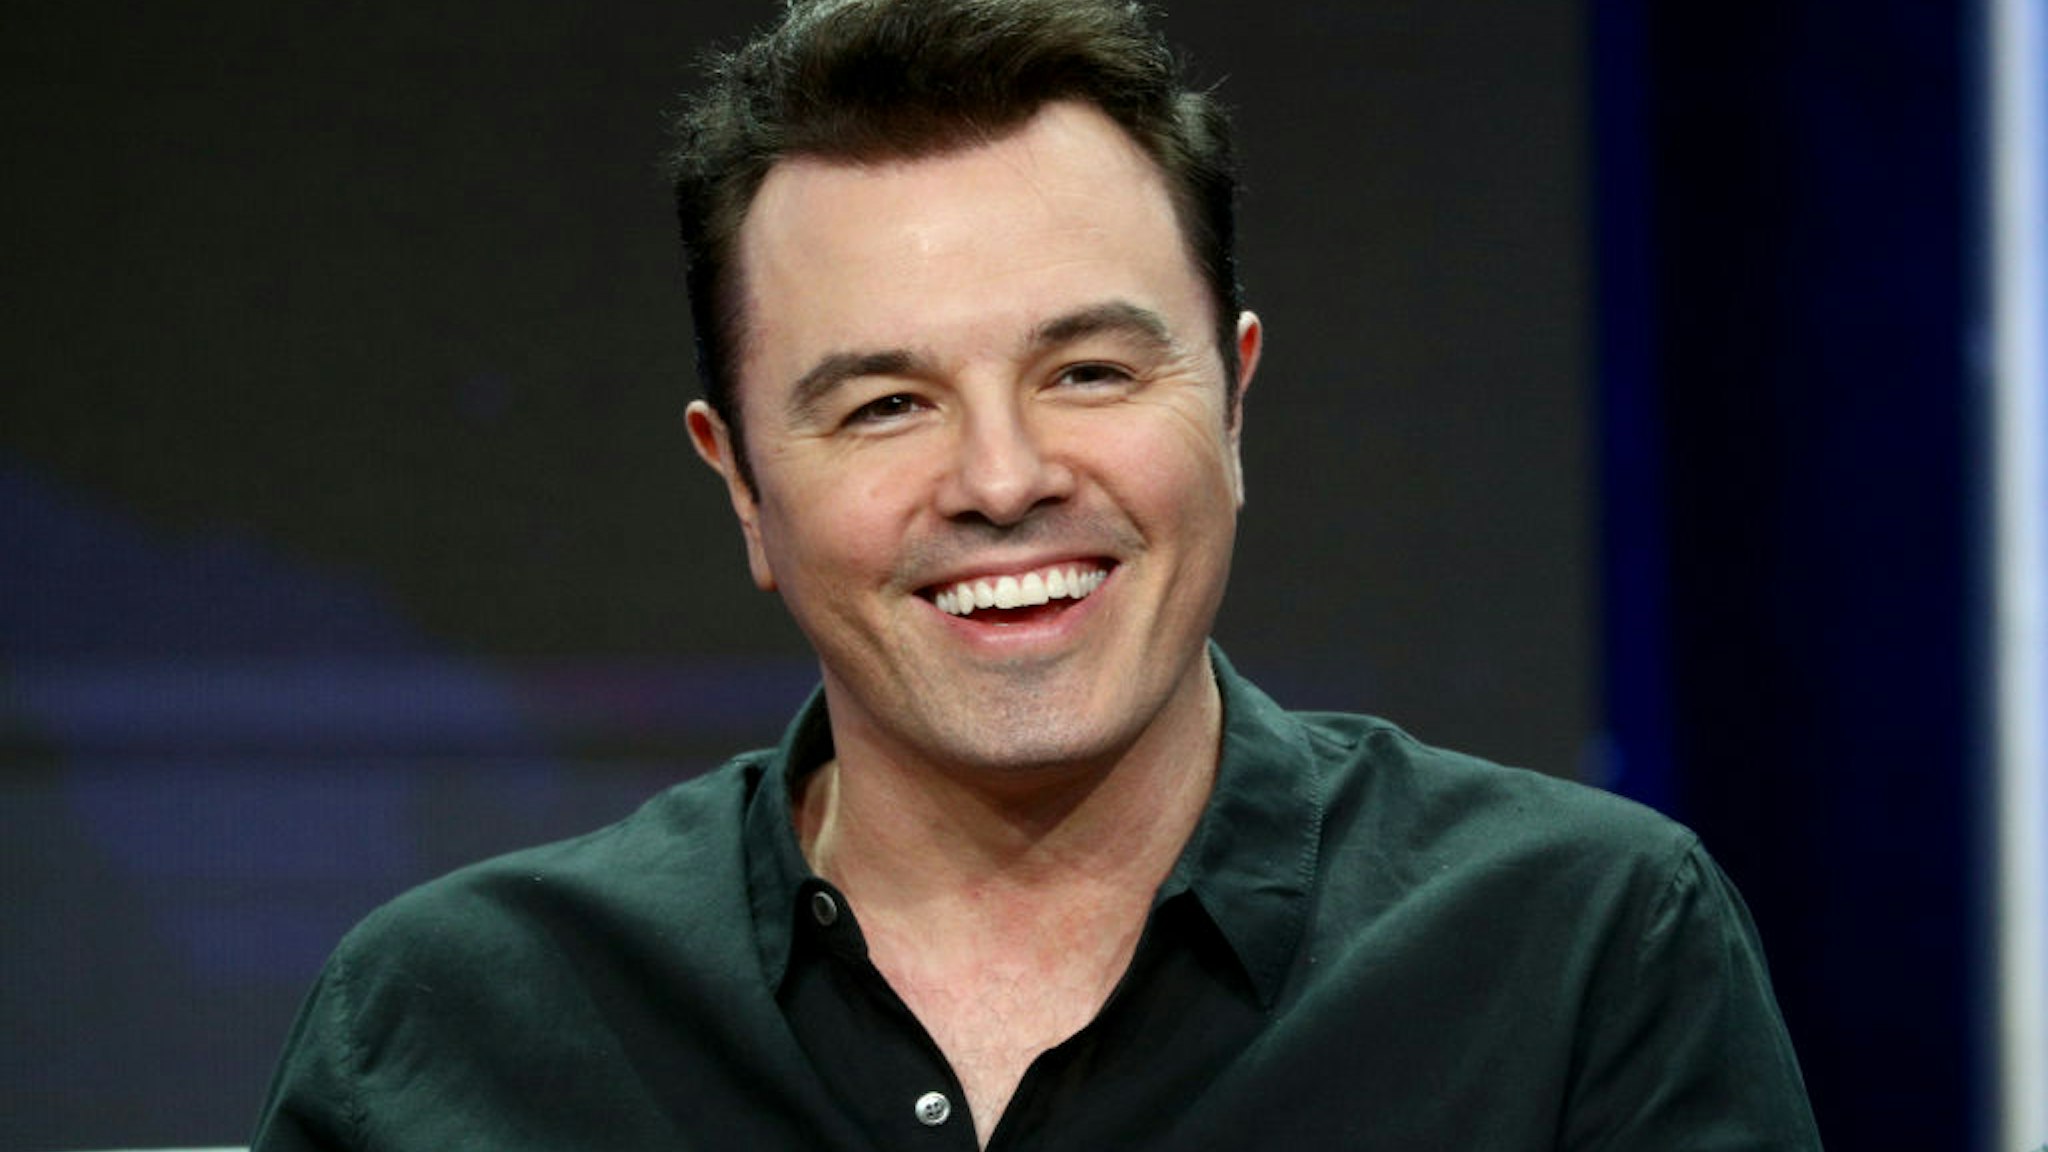 BEVERLY HILLS, CA - AUGUST 08: Creator/Writer/EP/Actor Seth MacFarlane of 'The Orville' speaks onstage during the FOX portion of the 2017 Summer Television Critics Association Press Tour at The Beverly Hilton Hotel on August 8, 2017 in Beverly Hills, California. (Photo by Frederick M. Brown/Getty Images)